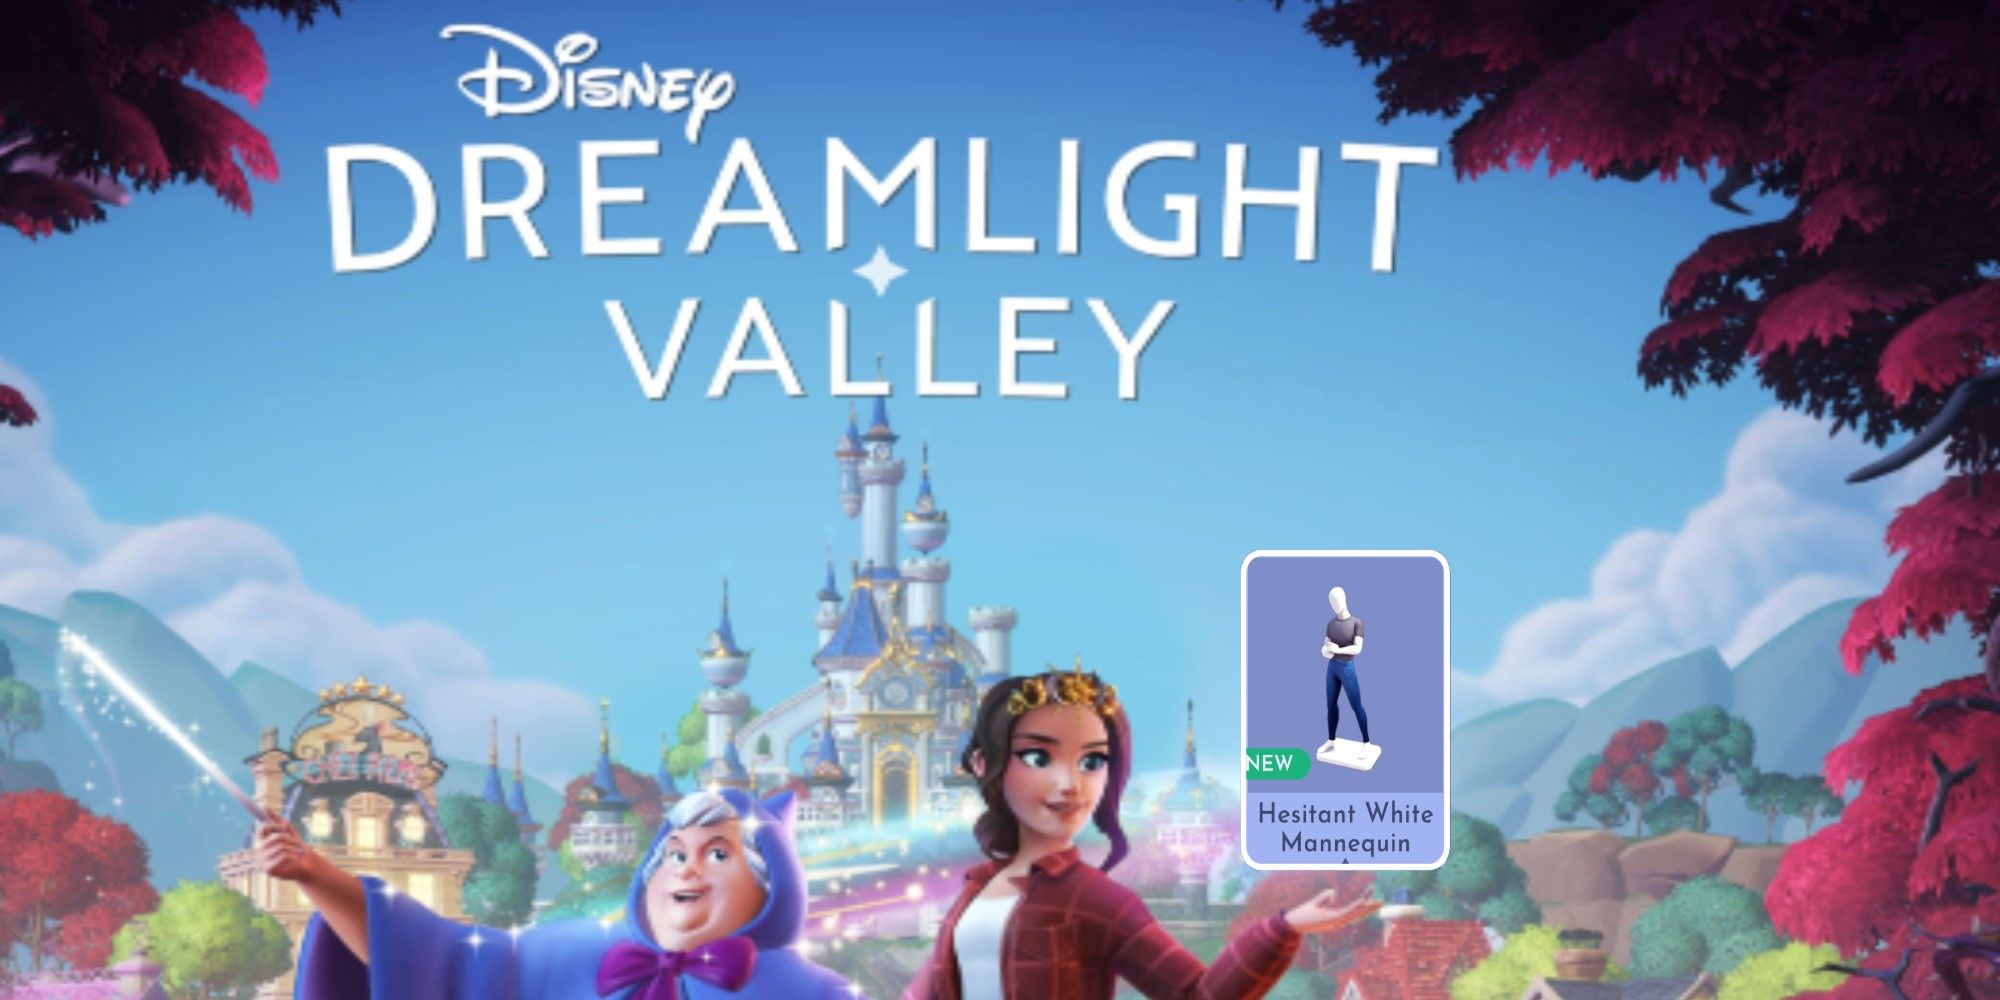 Disney Dreamlight Valley Split Image Loading Screen After Remembering Update With Thoughtful Black Mannequin